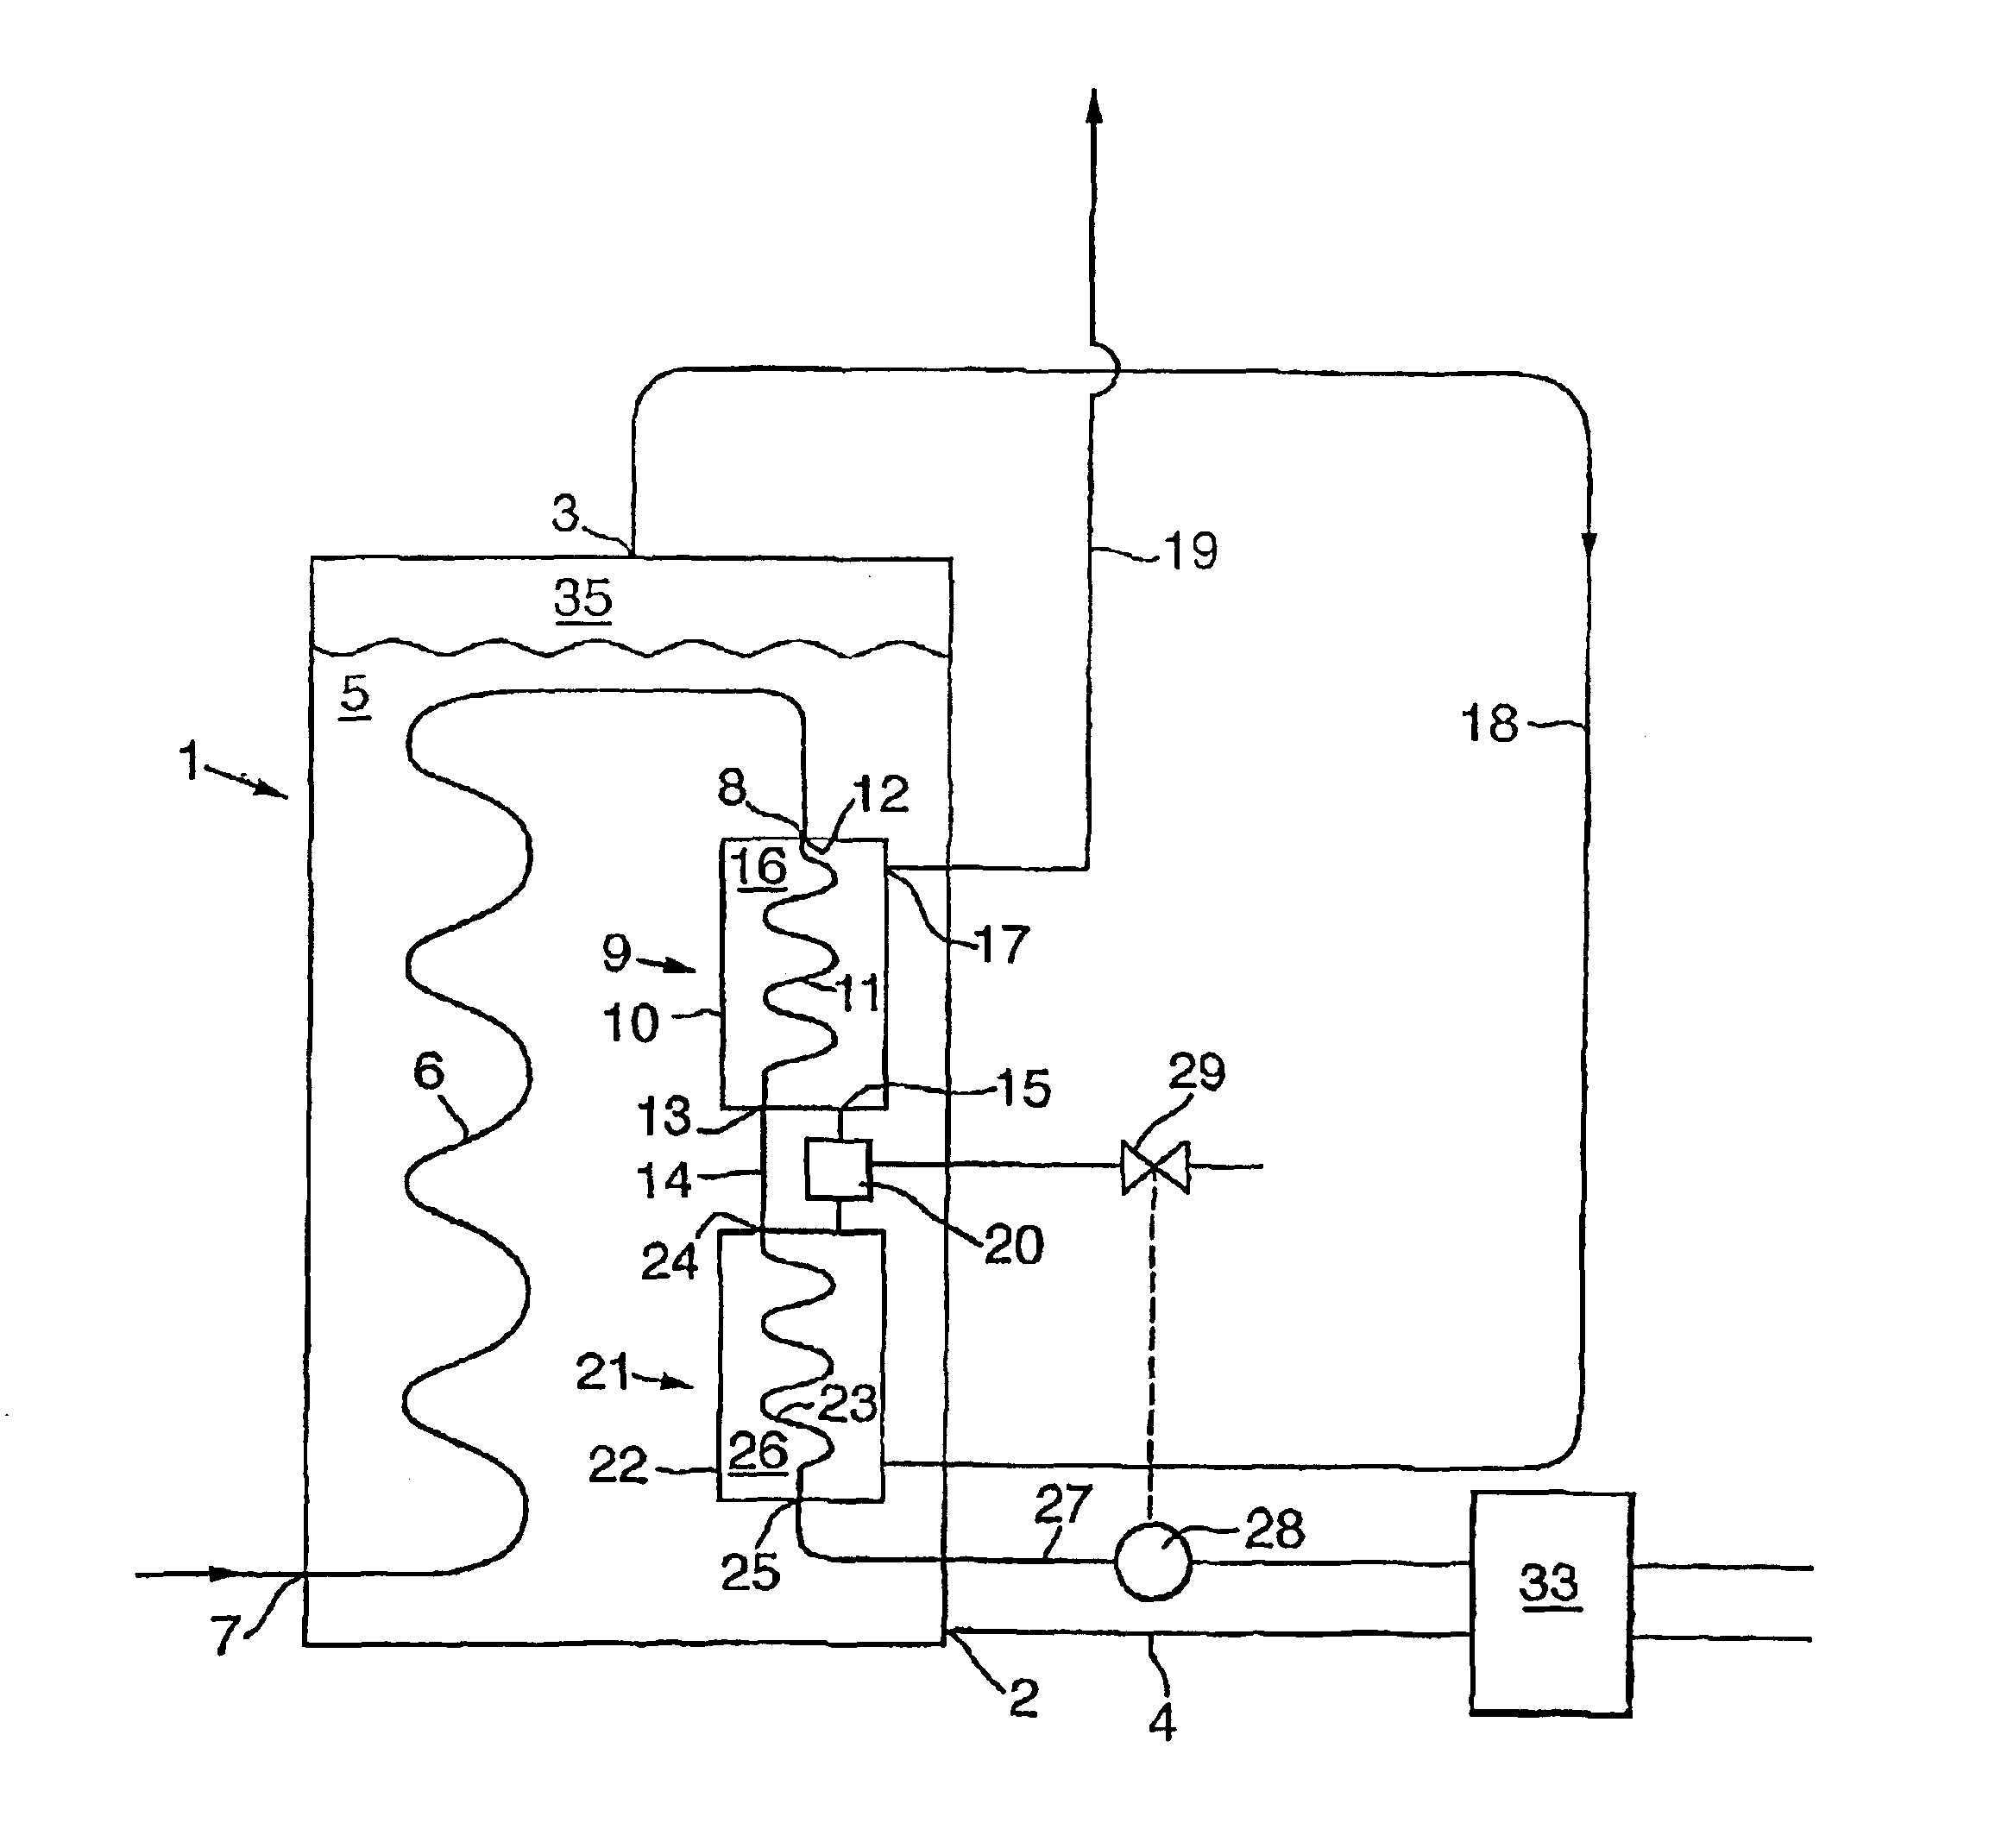 Process for heating system